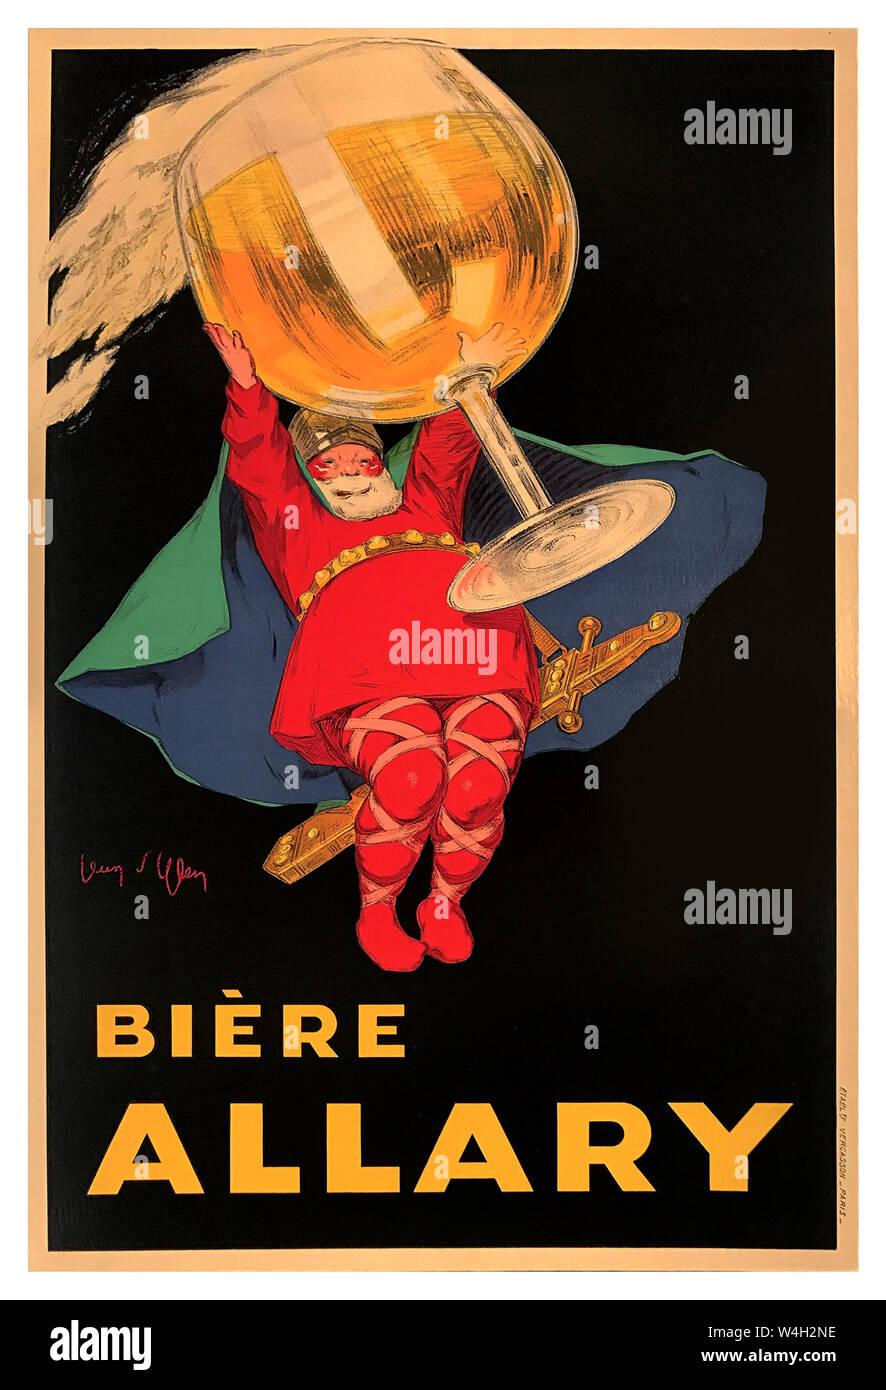 1900’s Vintage French Drinks Beer Alcohol Poster BIERE ALLARY by artist designer Jean d'Ylen (1886-1938),  First edition lithographic poster 1925 Allary Beer Vintage French Advertising France Jean d'Ylen was a popular French Impressionist & Graphic artist born in 1886 Stock Photo